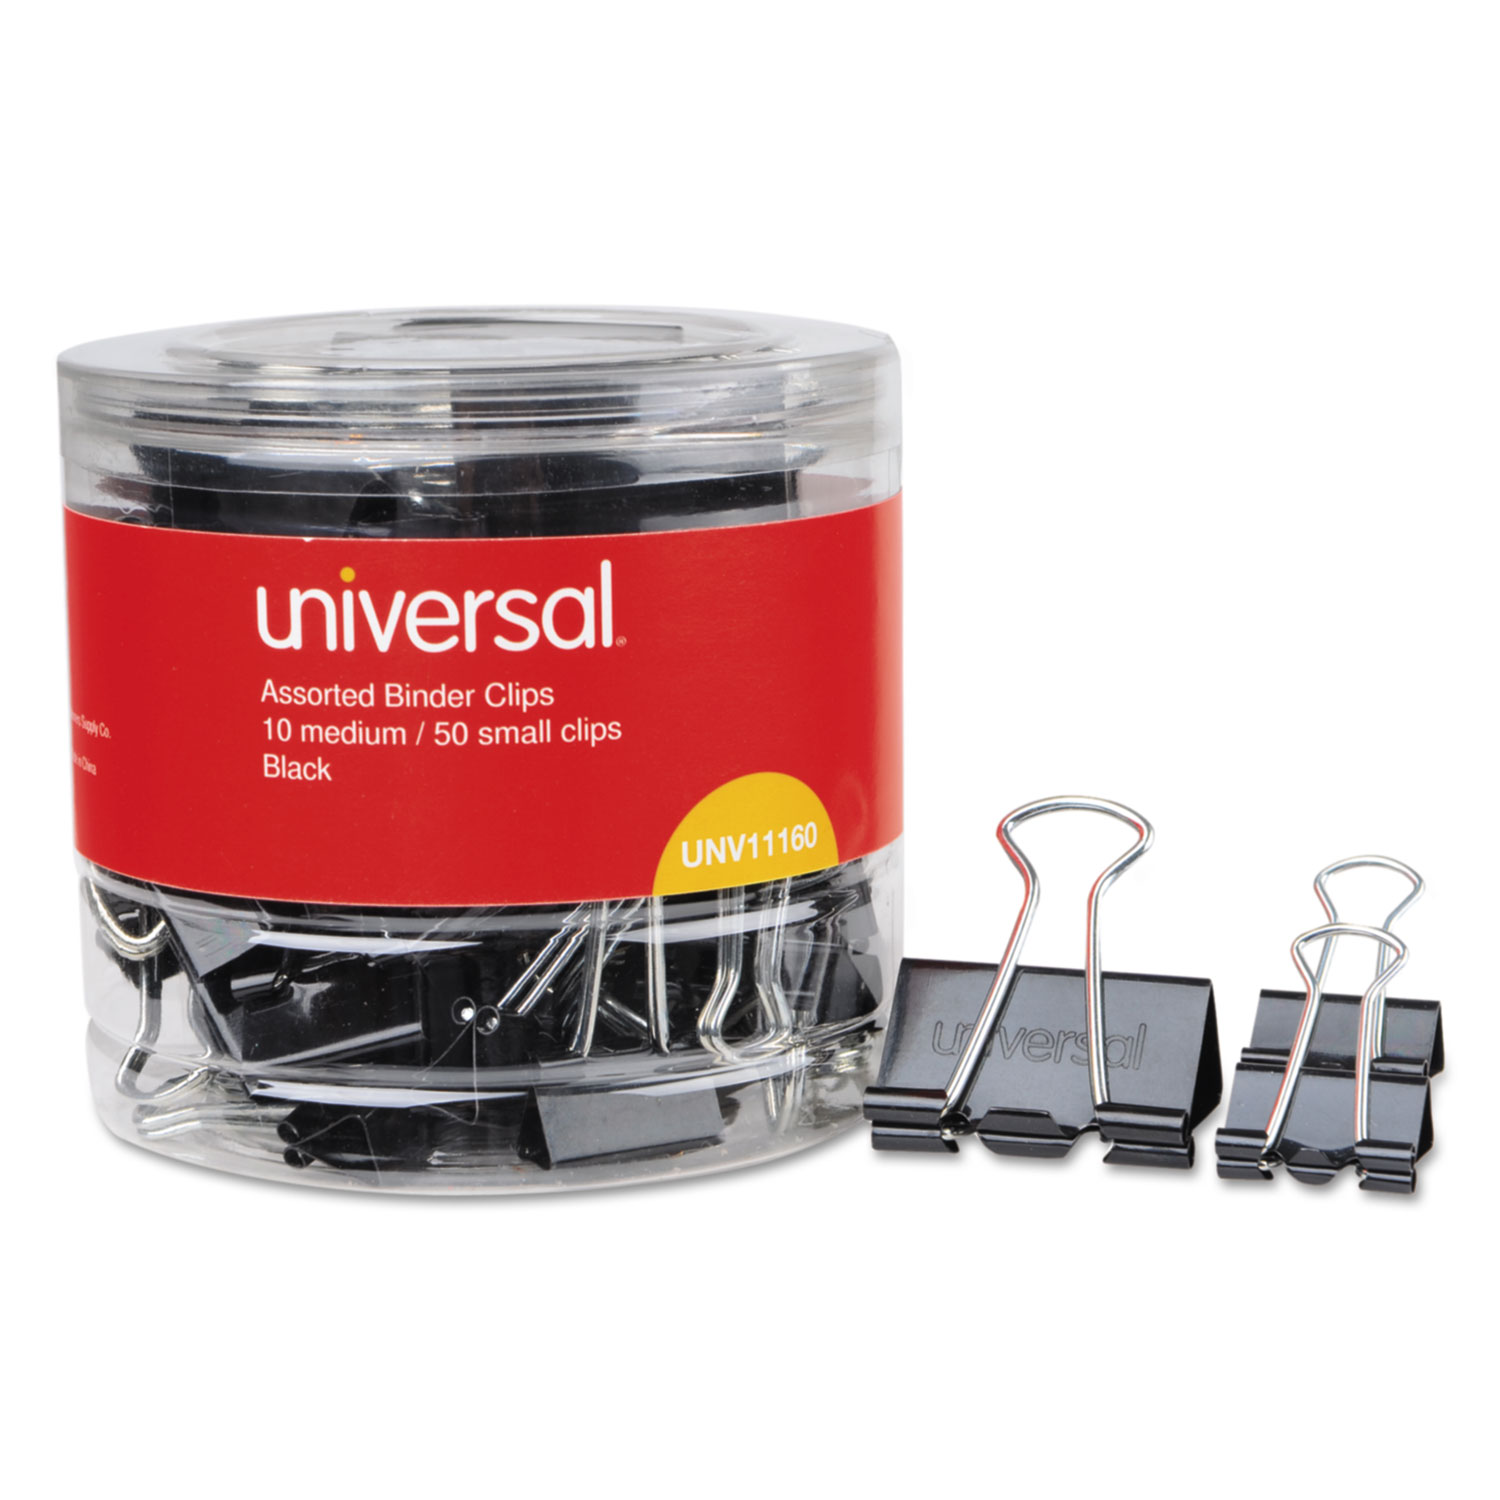  Universal UNV11160 Binder Clips in Dispenser Tub, Assorted Sizes, Black/Silver, 60/Pack (UNV11160) 